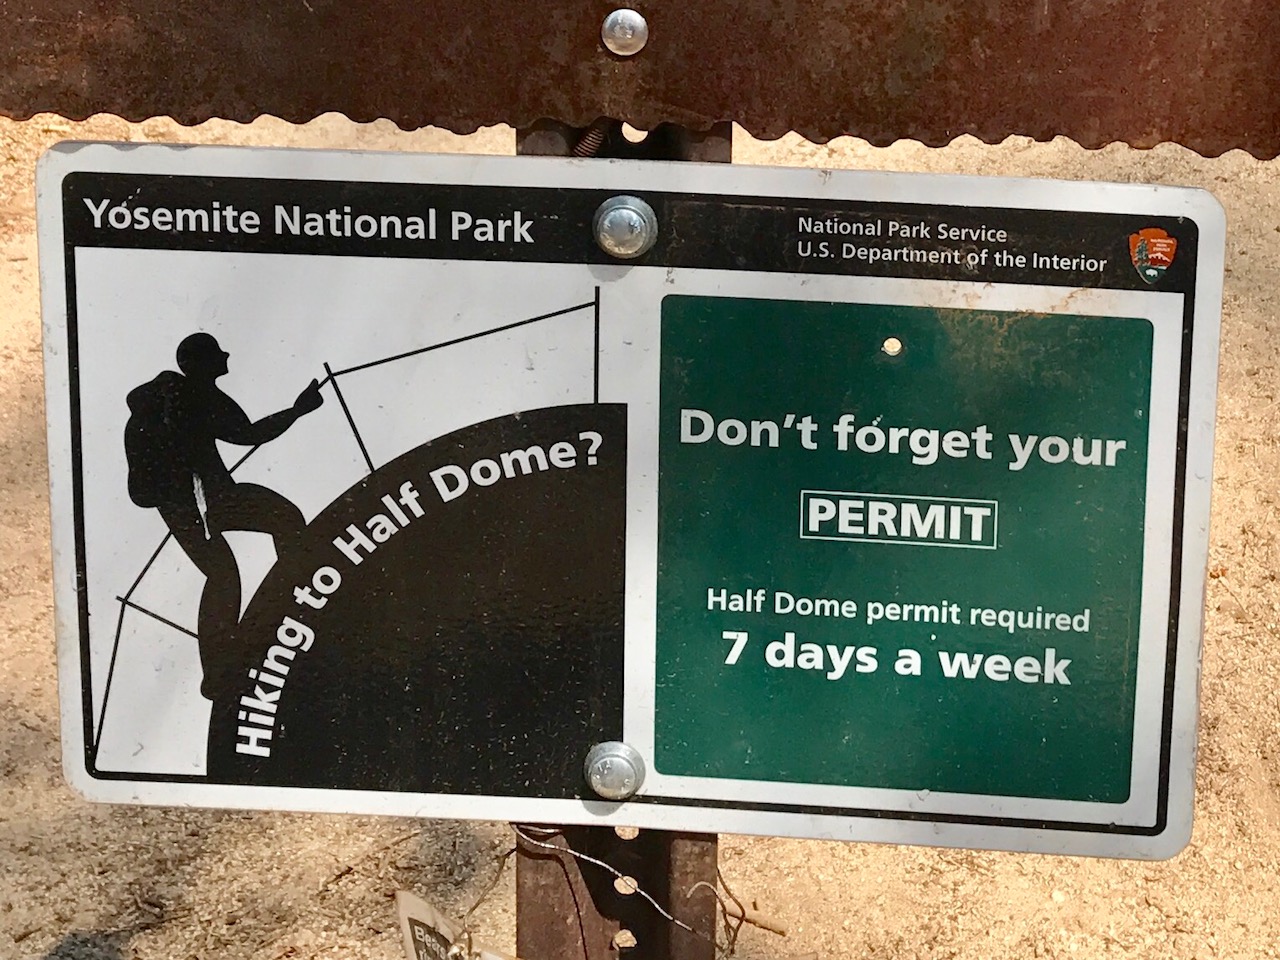 A sign that we spotted on the trail. Permits really are required, and checked 7 days a week.